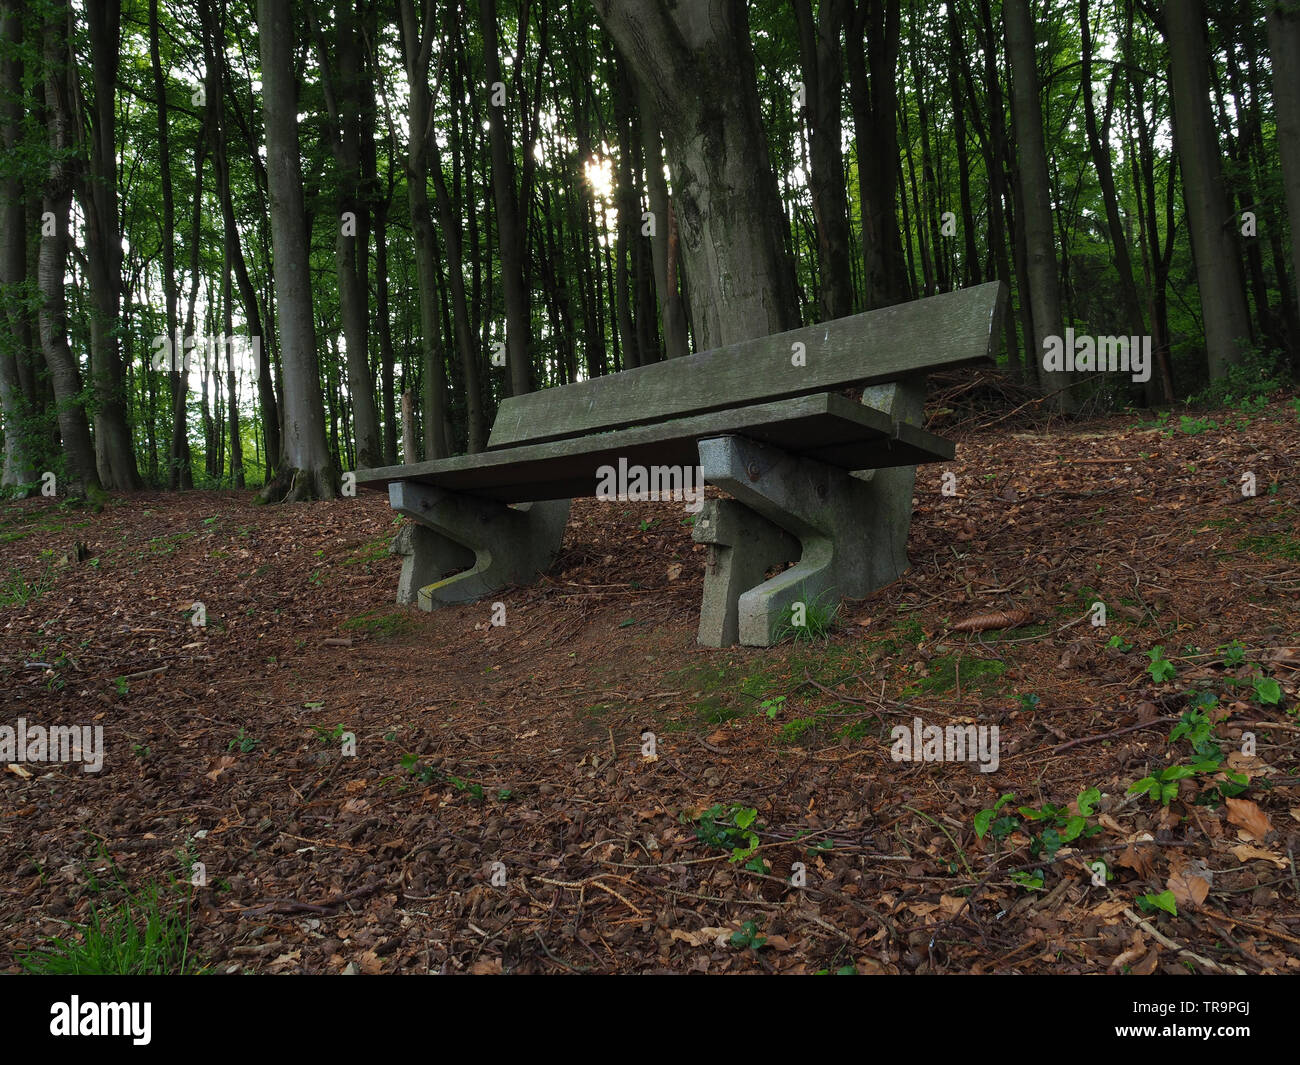 A wooden bench in a forest in Wiehl Germany Stock Photo